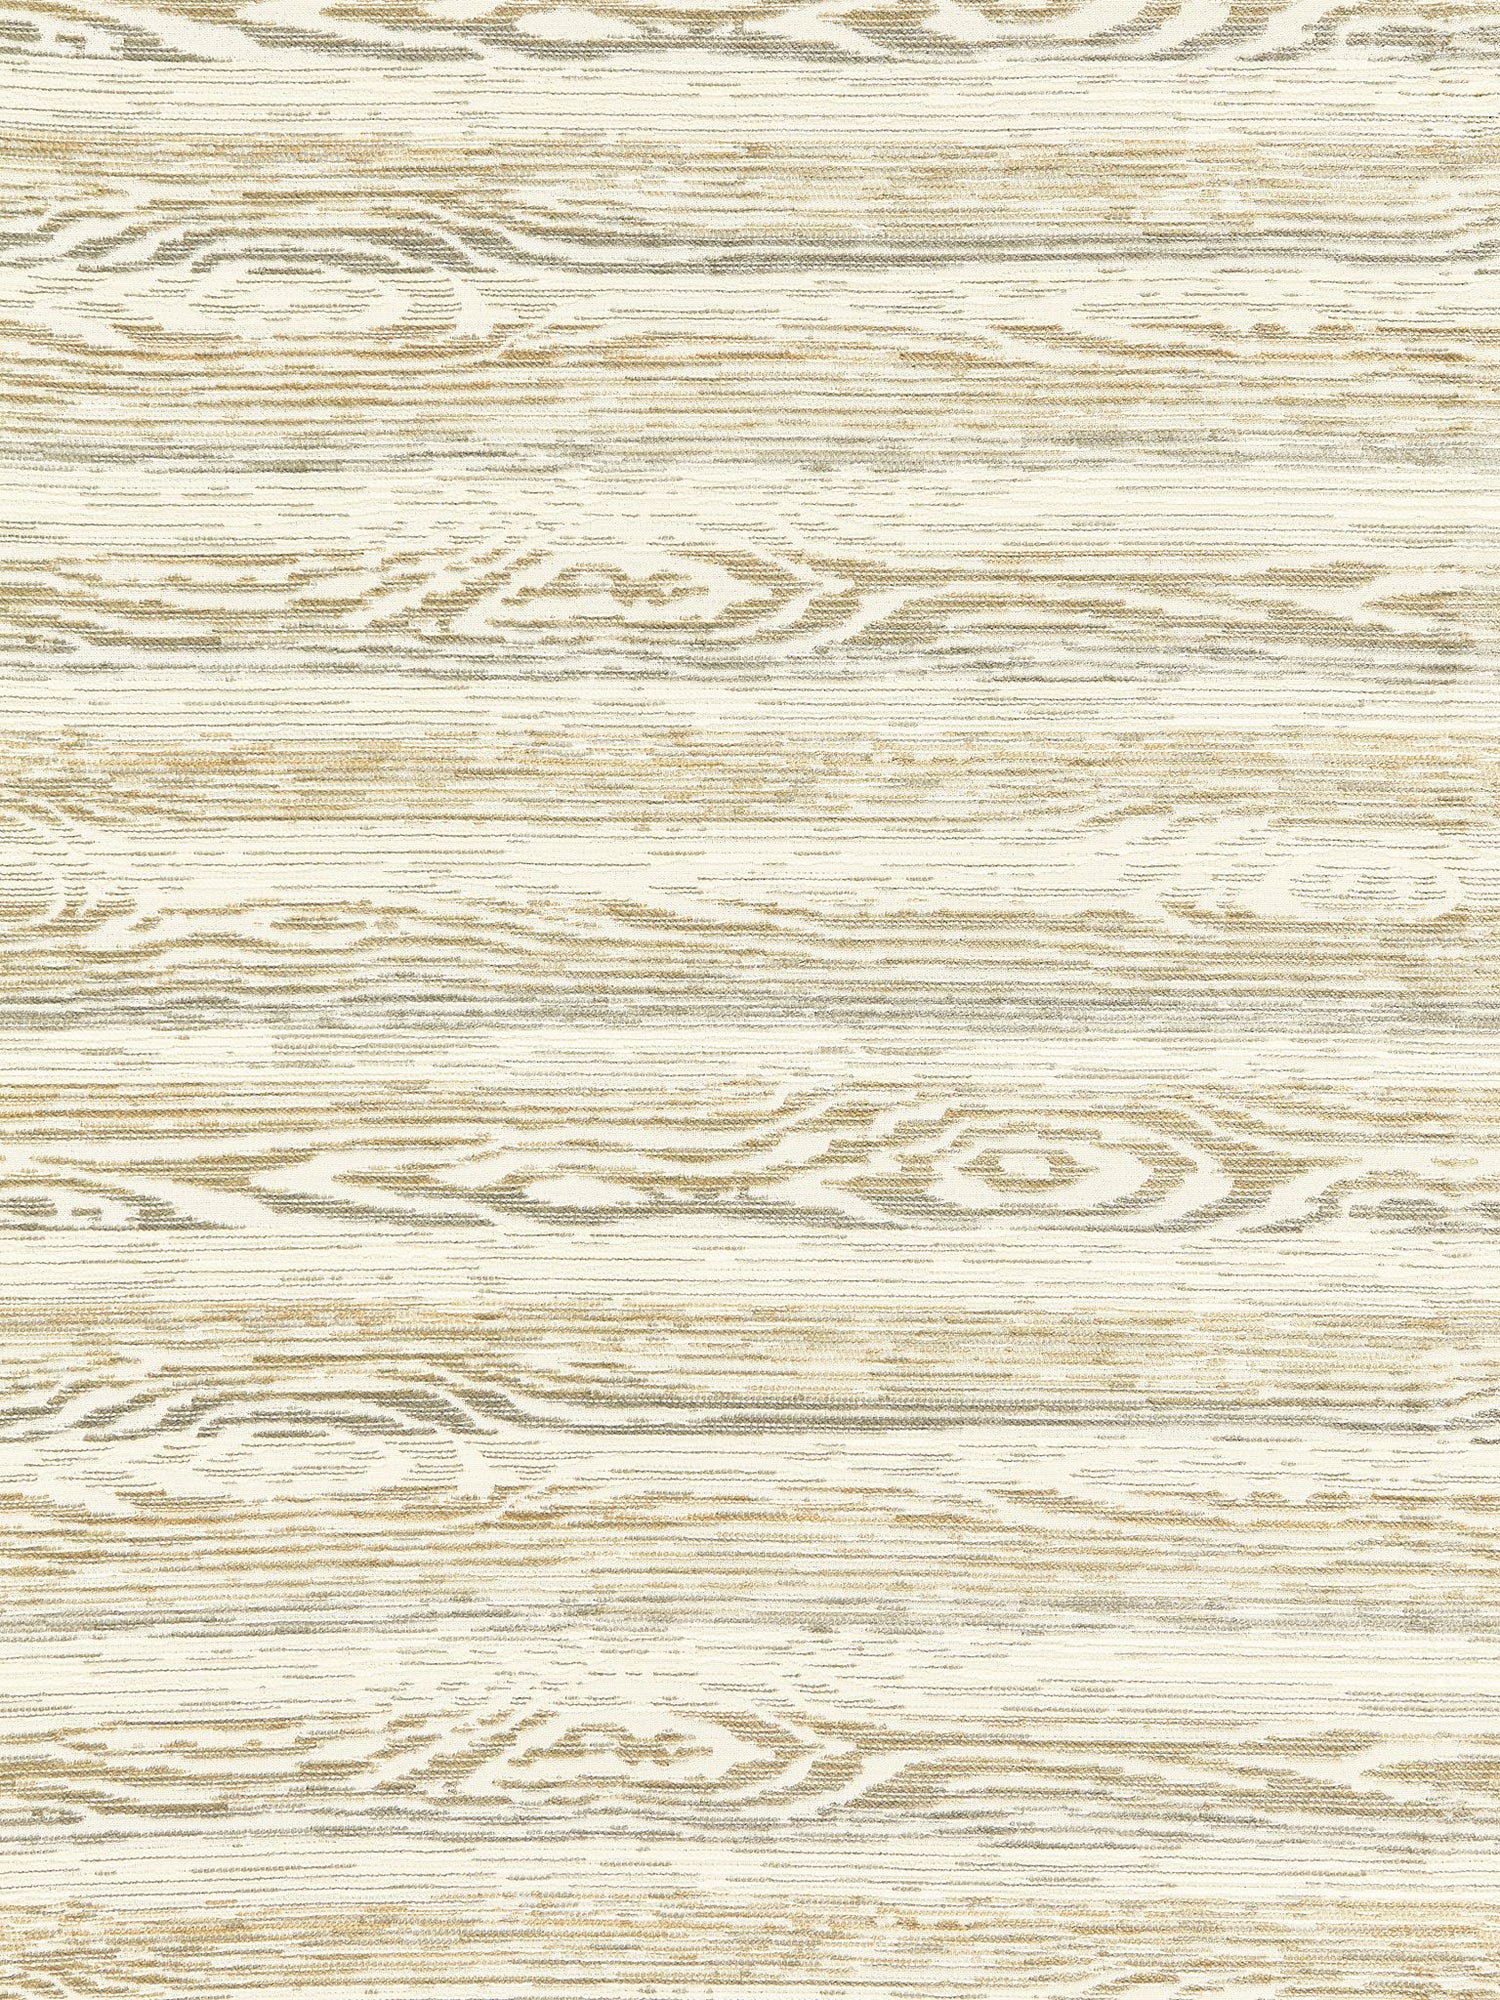 Muir Woods fabric in birch color - pattern number CD 0054OB41 - by Scalamandre in the Old World Weavers collection